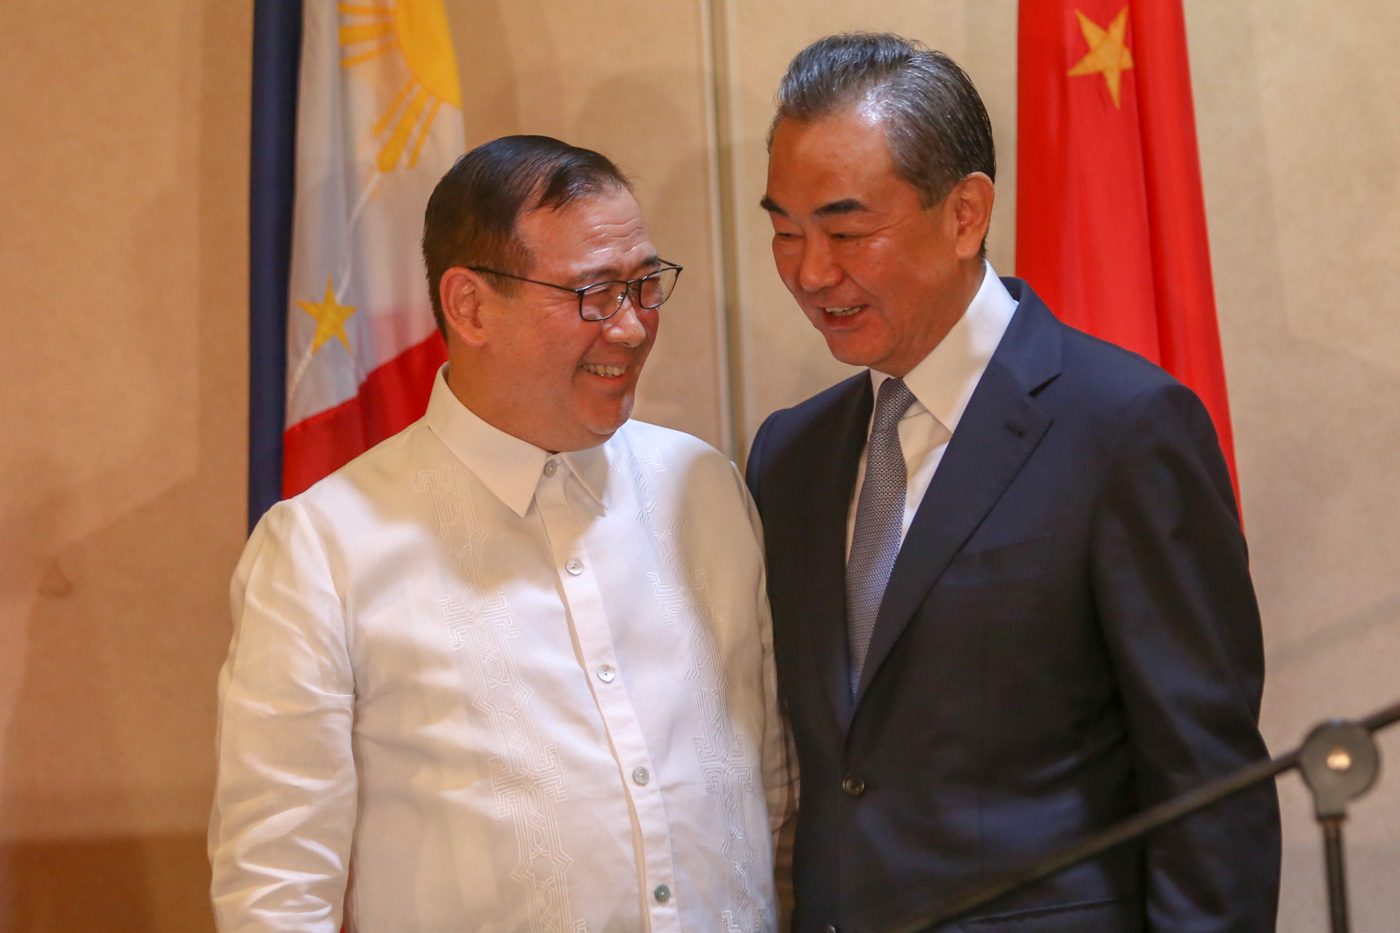 TOP DIPLOMATS. Philippine Foreign Secretary Teodoro Locsin Jr (left) and Chinese State Councilor and Foreign Minister Wang Yi share a light moment during the latter's official visit to Davao City, Philippines, on October 29, 2018. Photo by Manman Dejeto/Rappler  